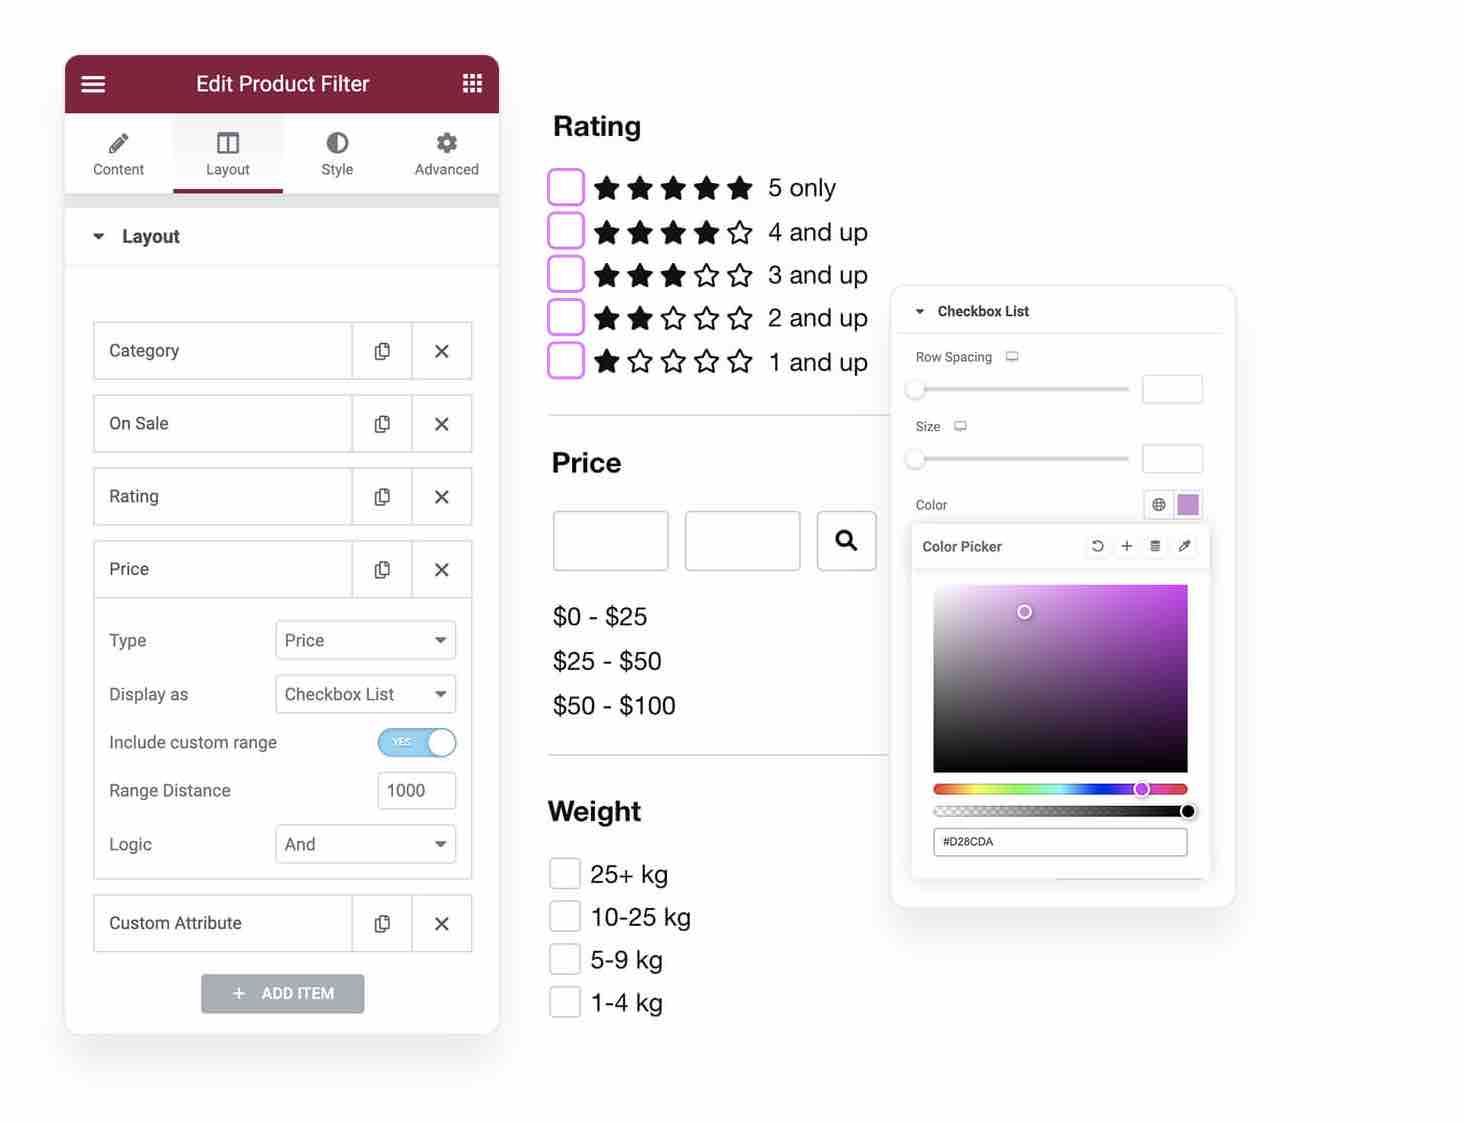 Jupiter X2 allows you to create advanced search filters on your WooCommerce store.